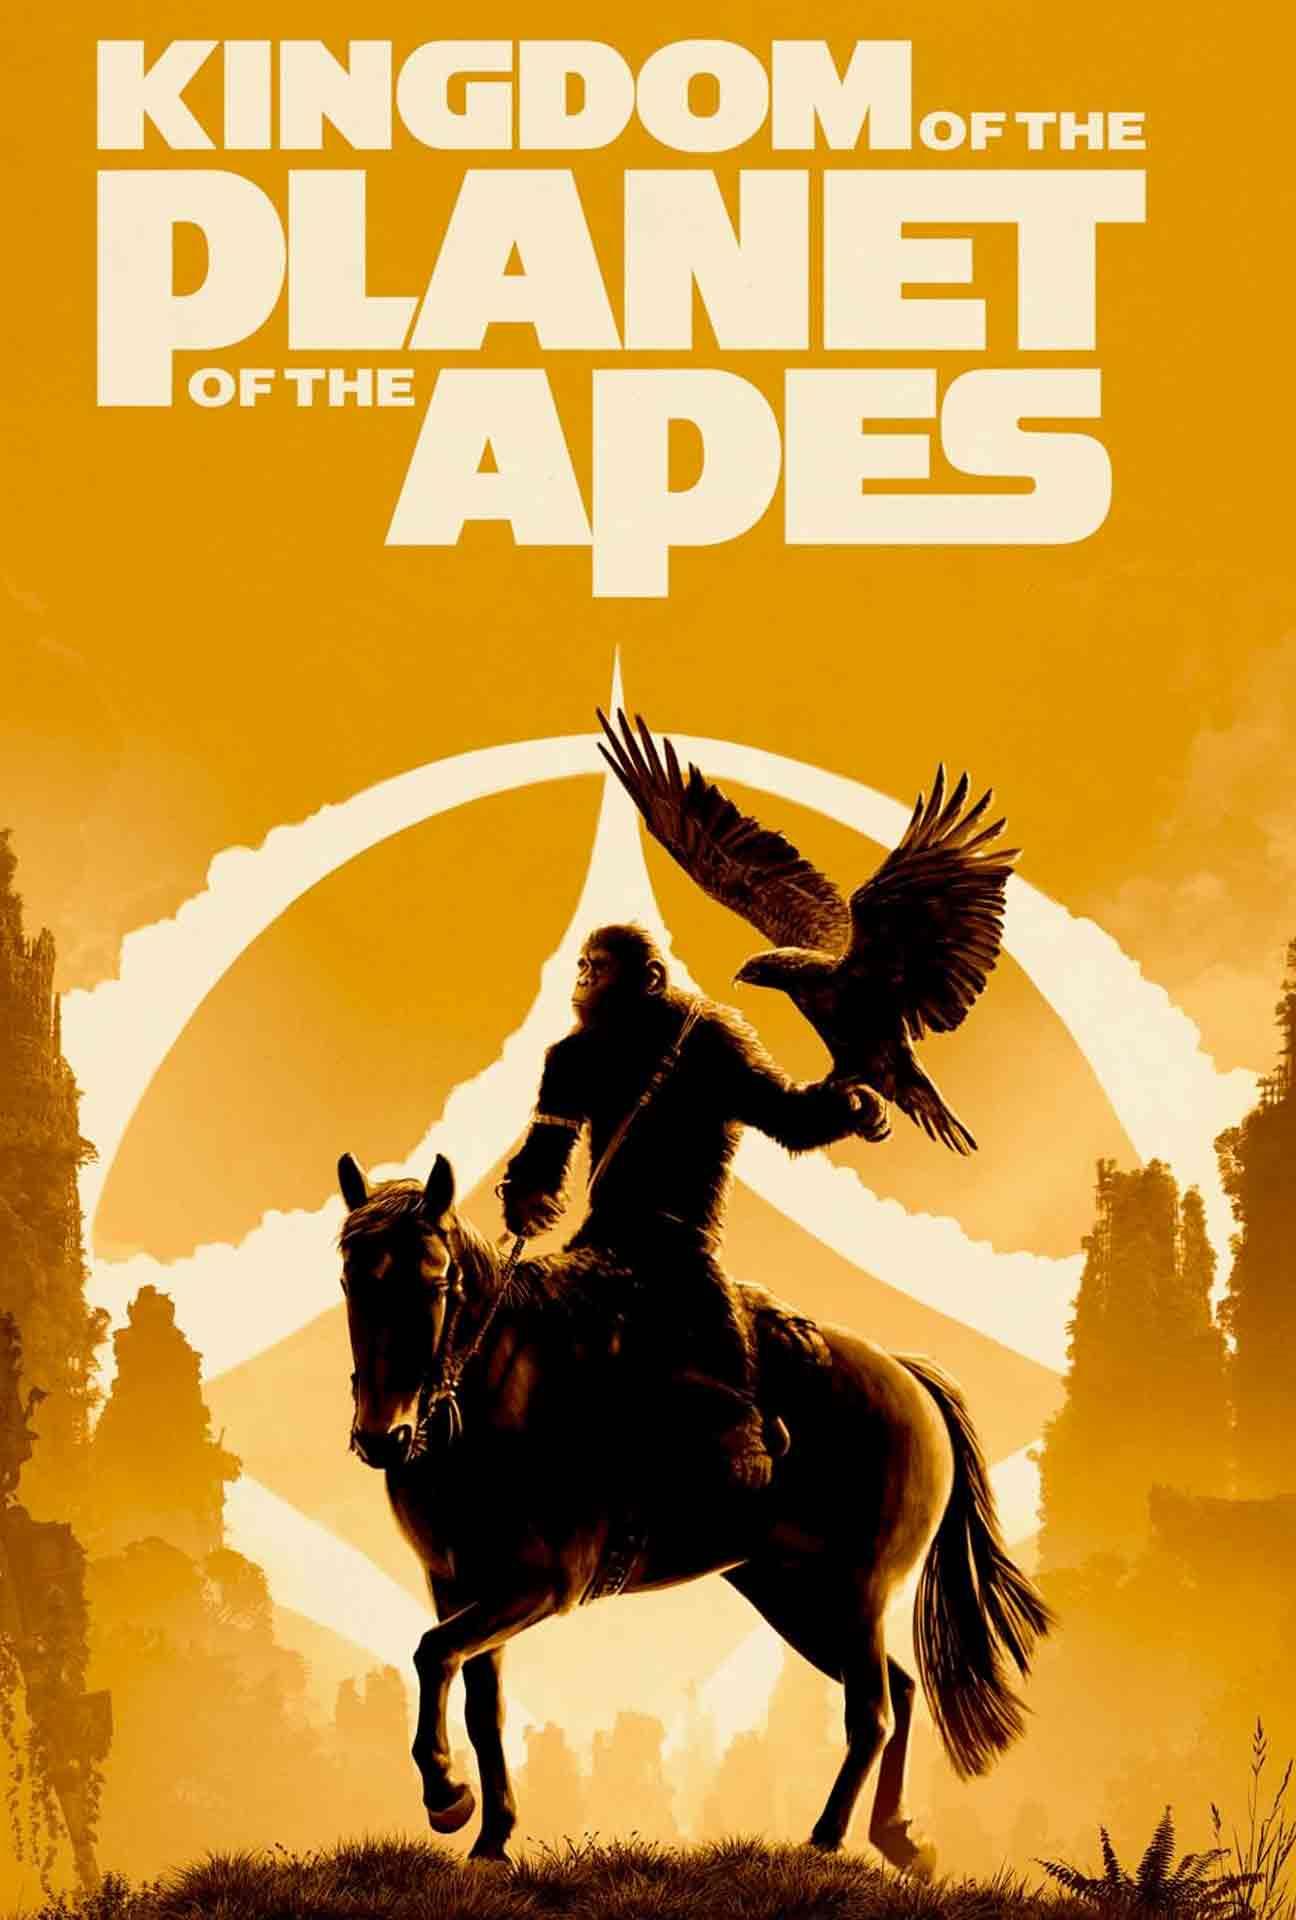 Movie Poster for Kingdom of the Planet of the Apes